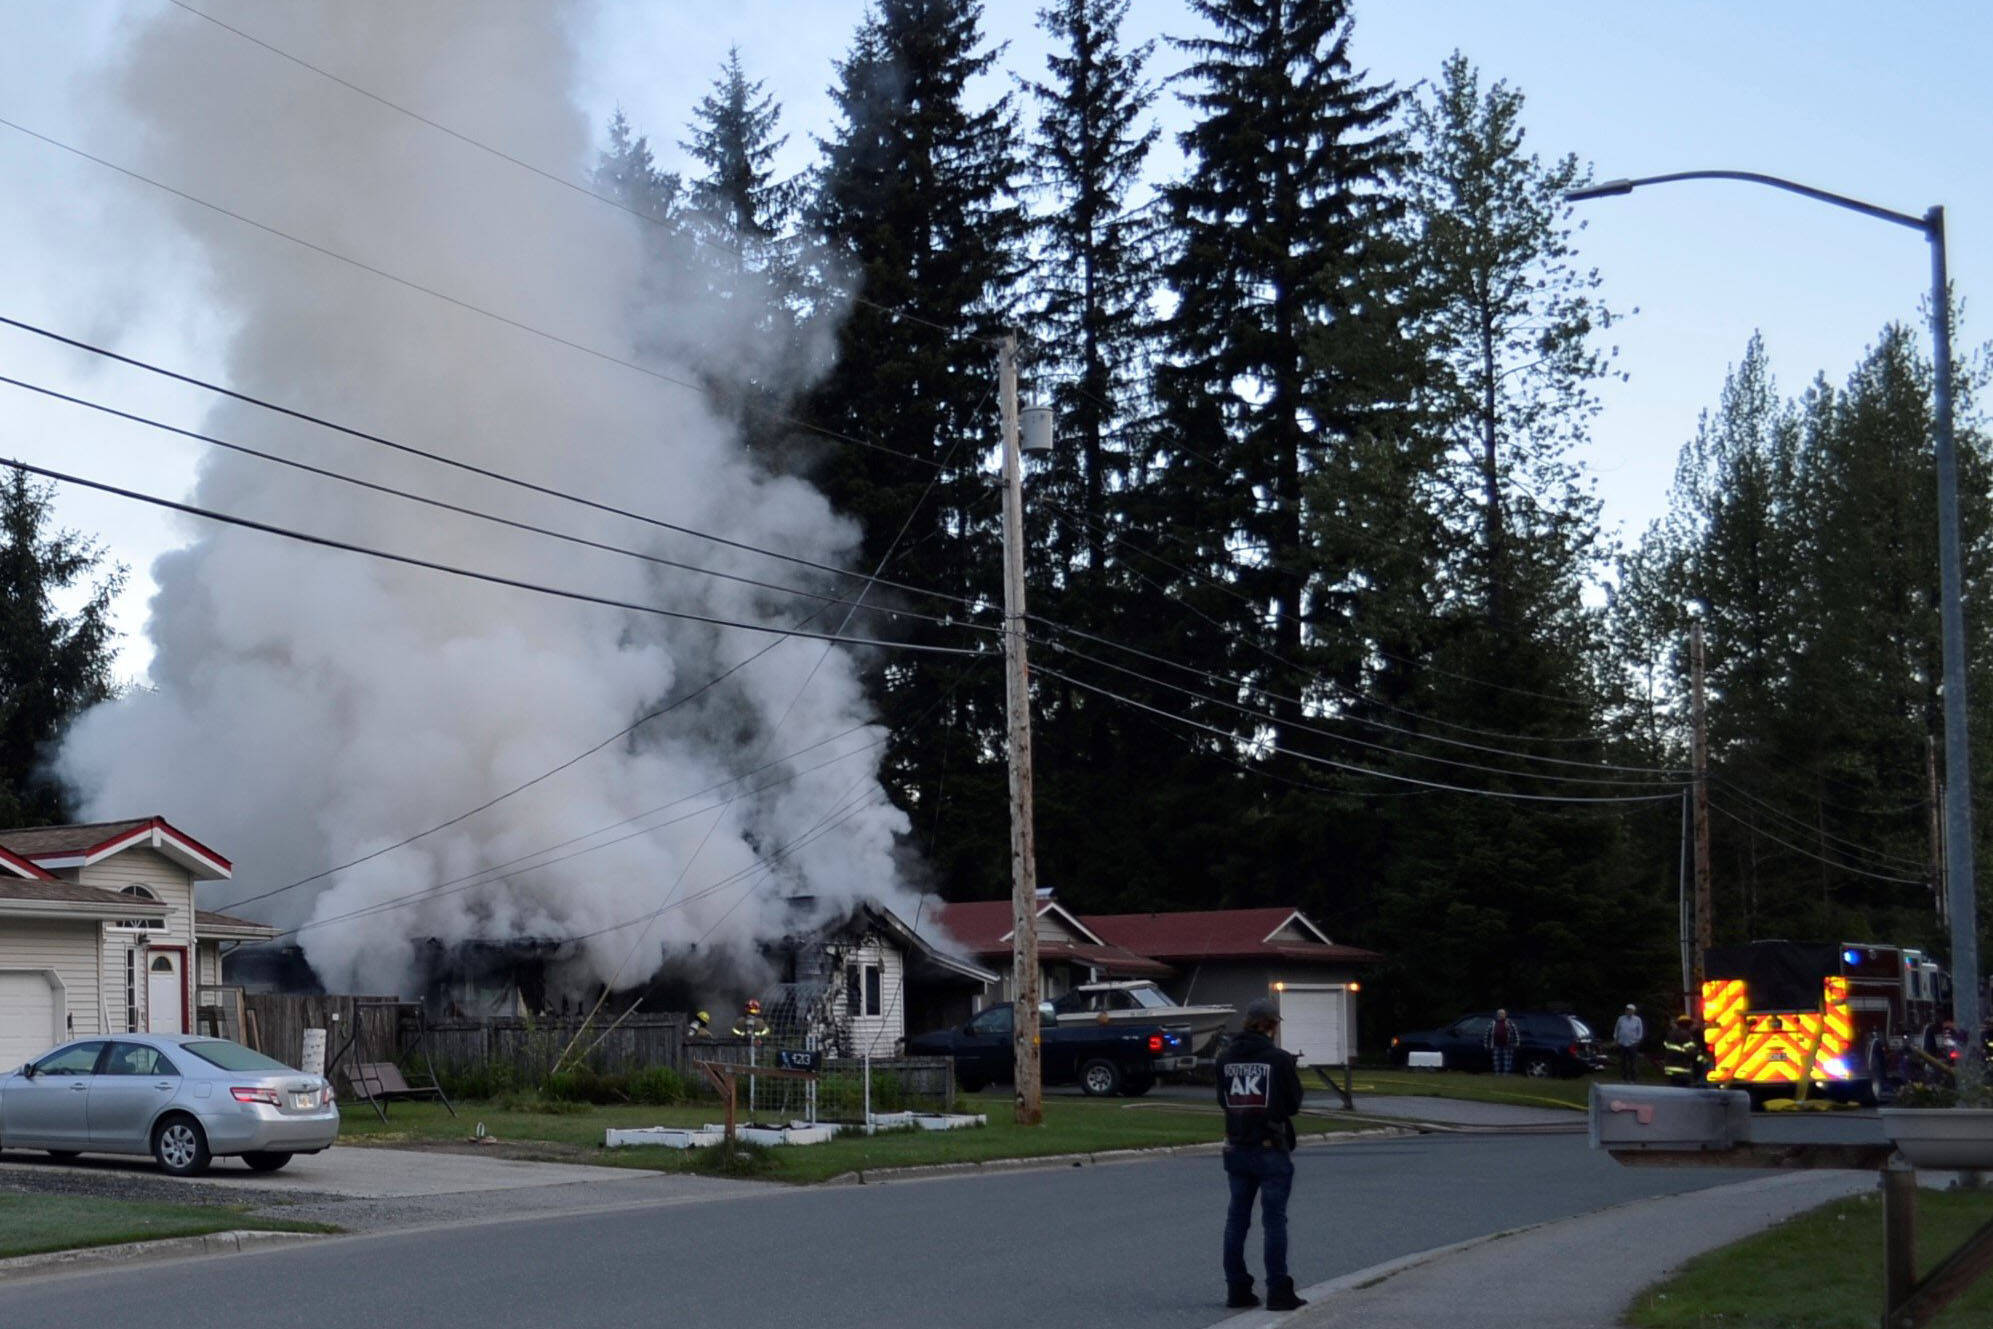 A residential fire totaled a house in the Mendenhall Valley on May 30, 2022, possibly caused by electrical issues. (Courtesy photo / Dan Jager)